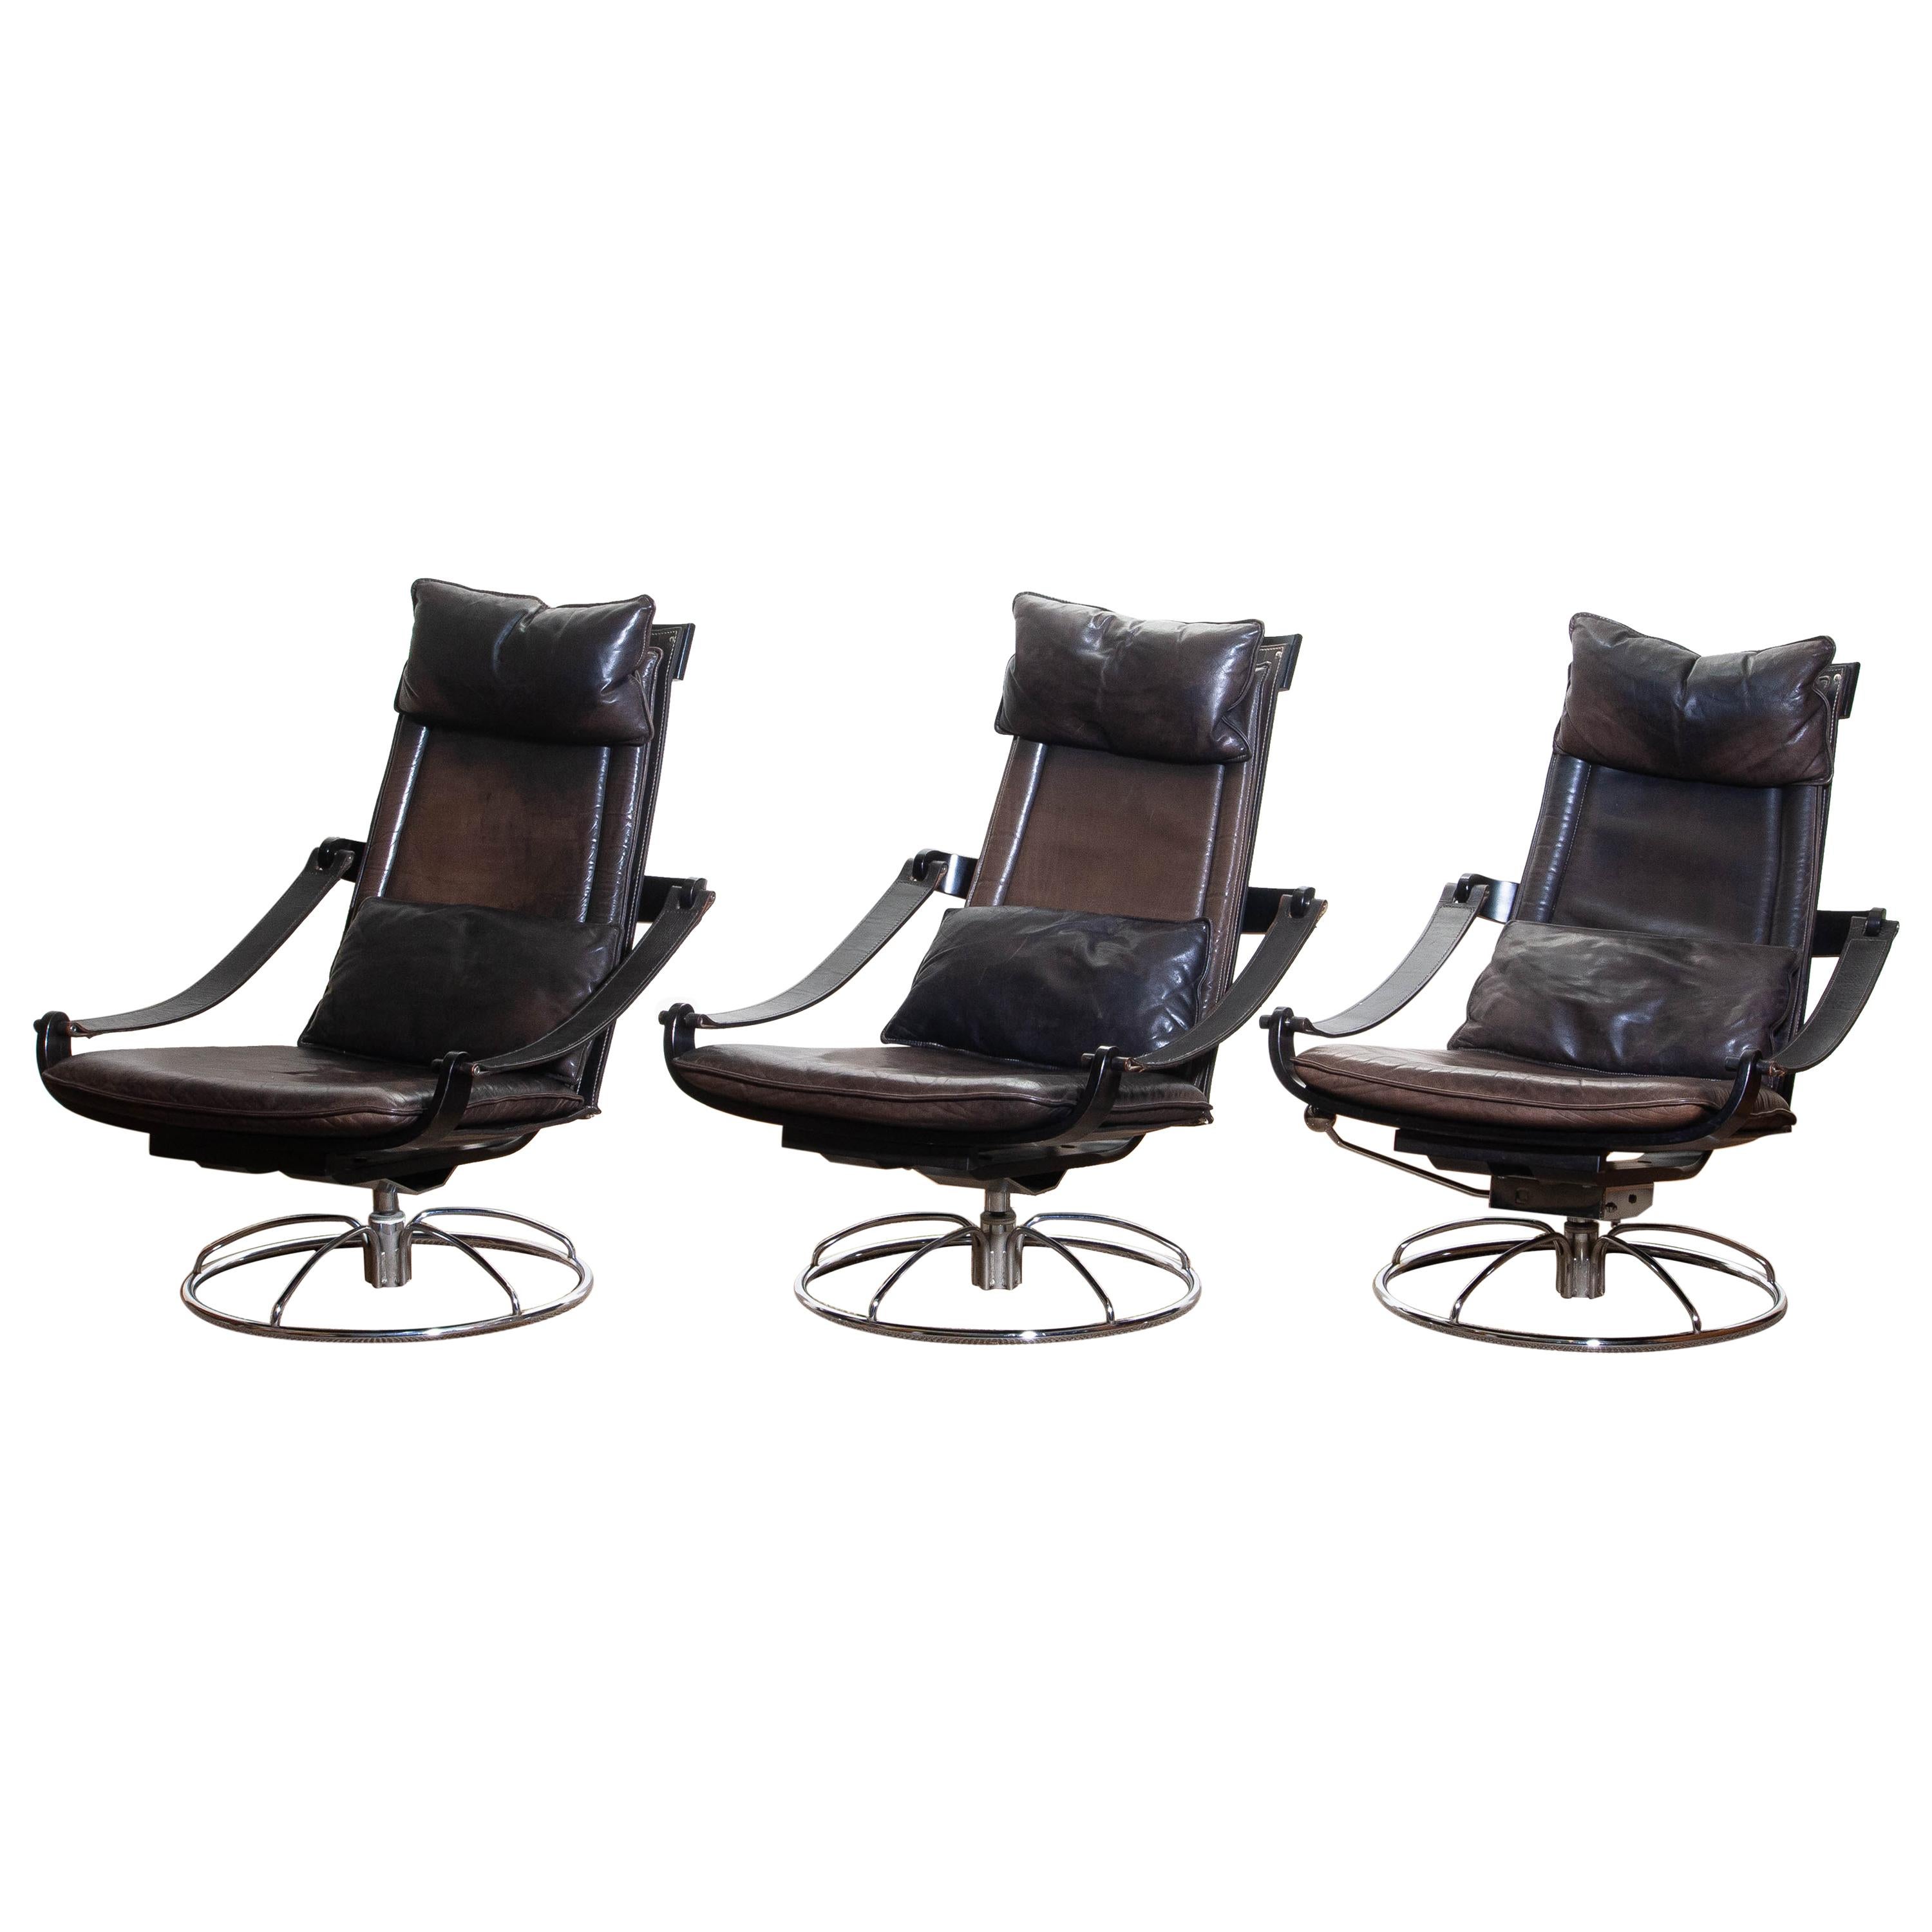 Scandinavian Modern 1970s, Three Leather Swivel / Relax Chairs by Ake Fribytter for Nelo, Sweden